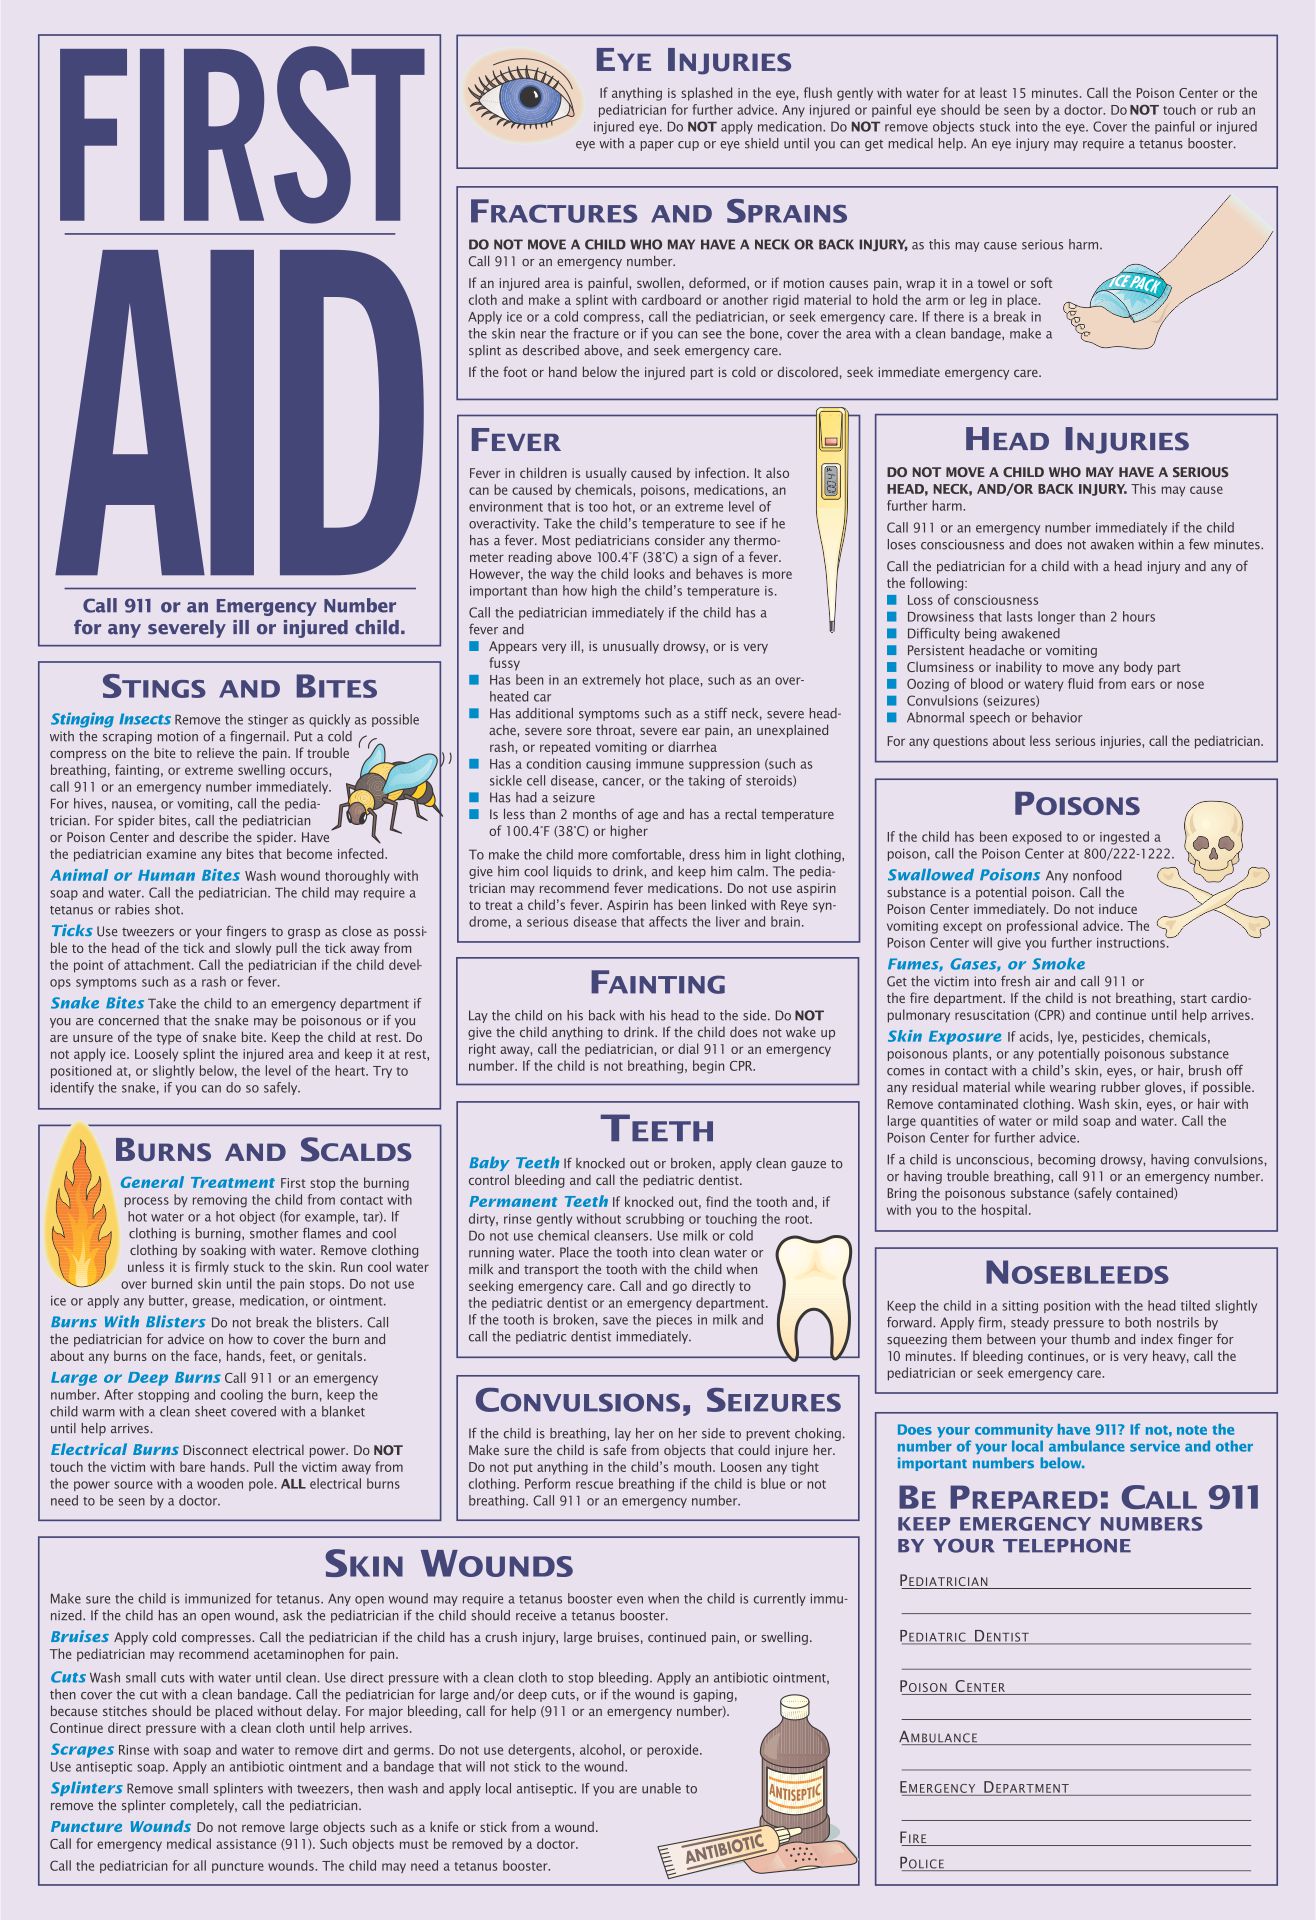 8-best-images-of-printable-first-aid-poster-printable-first-aid-for